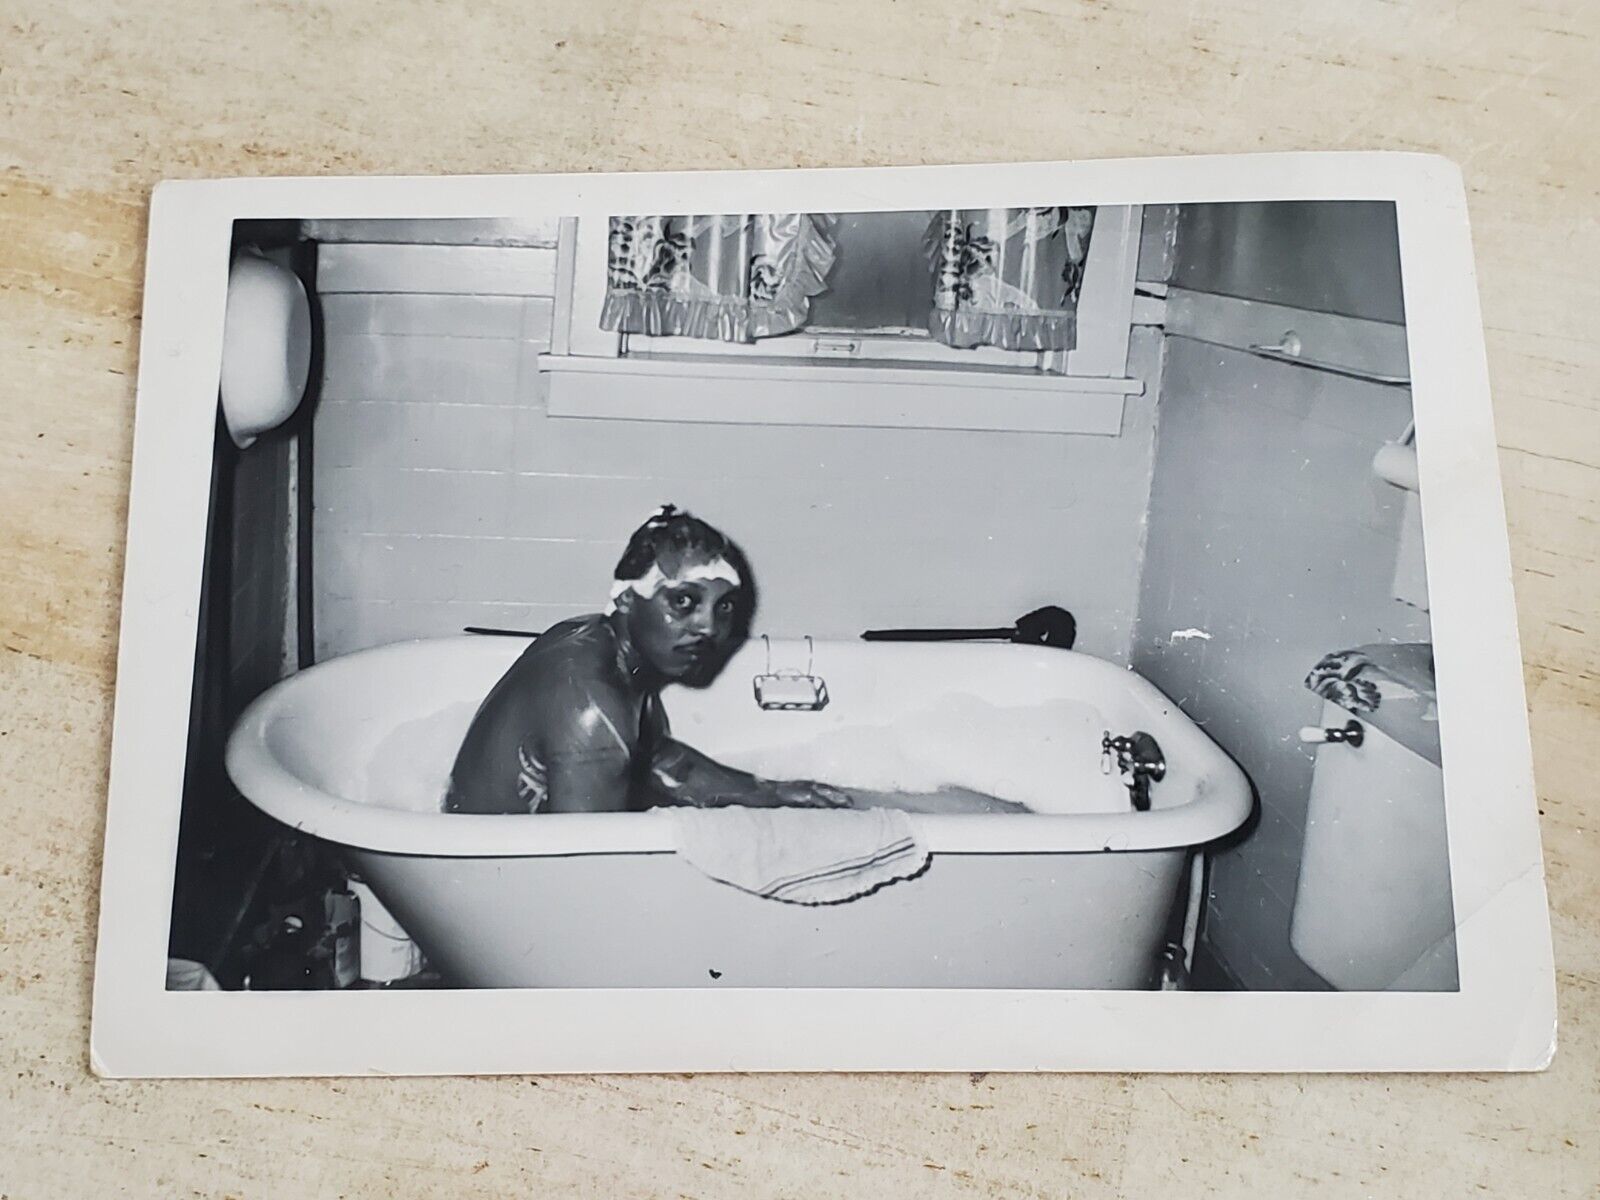 1950s VINTAGE ANGRY AFRICAN AMERICAN GROWN MAN CAUGHT IN BATHTUB SOAP ON HEAD